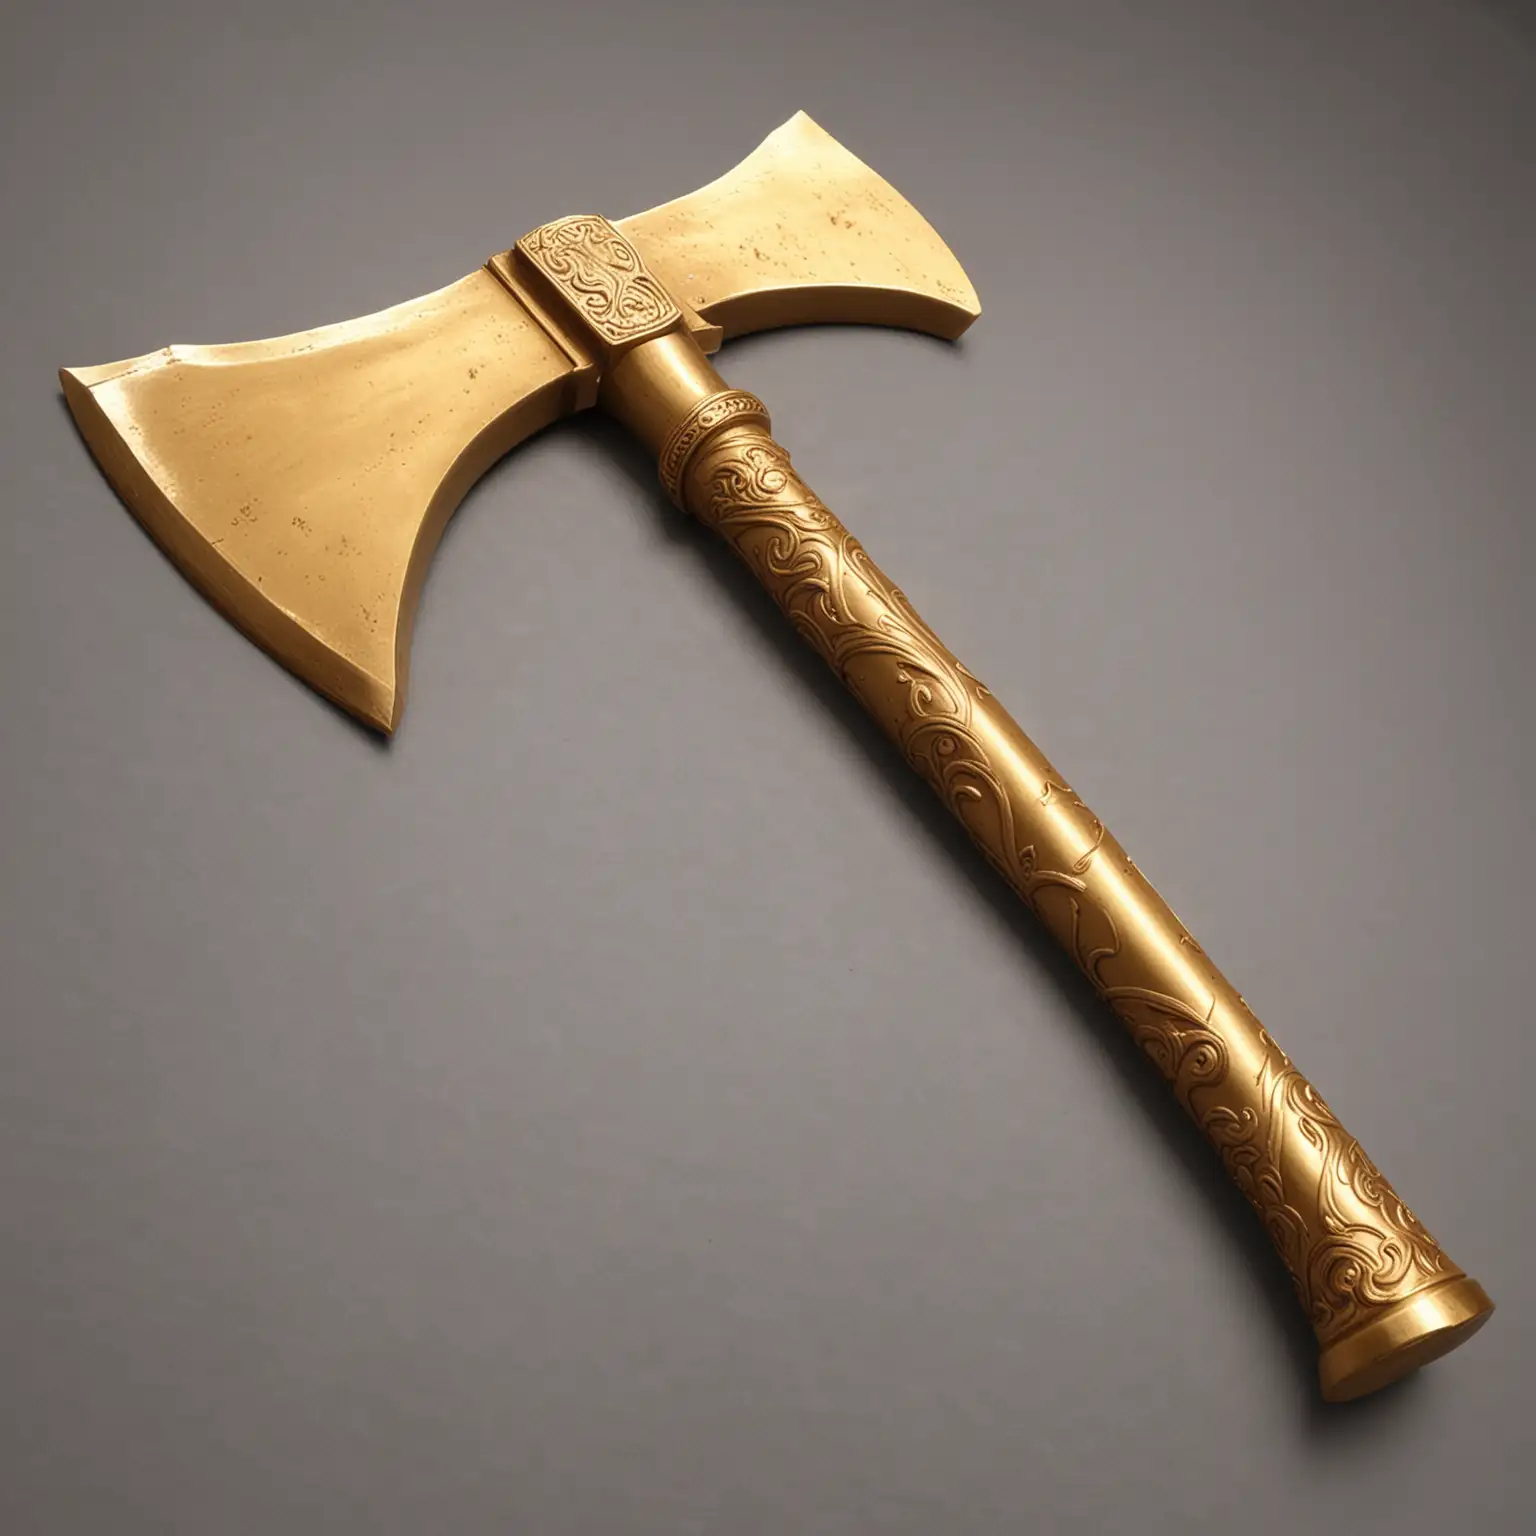 Large Golden Ax with Solid Blade Majestic Weaponry Illustration